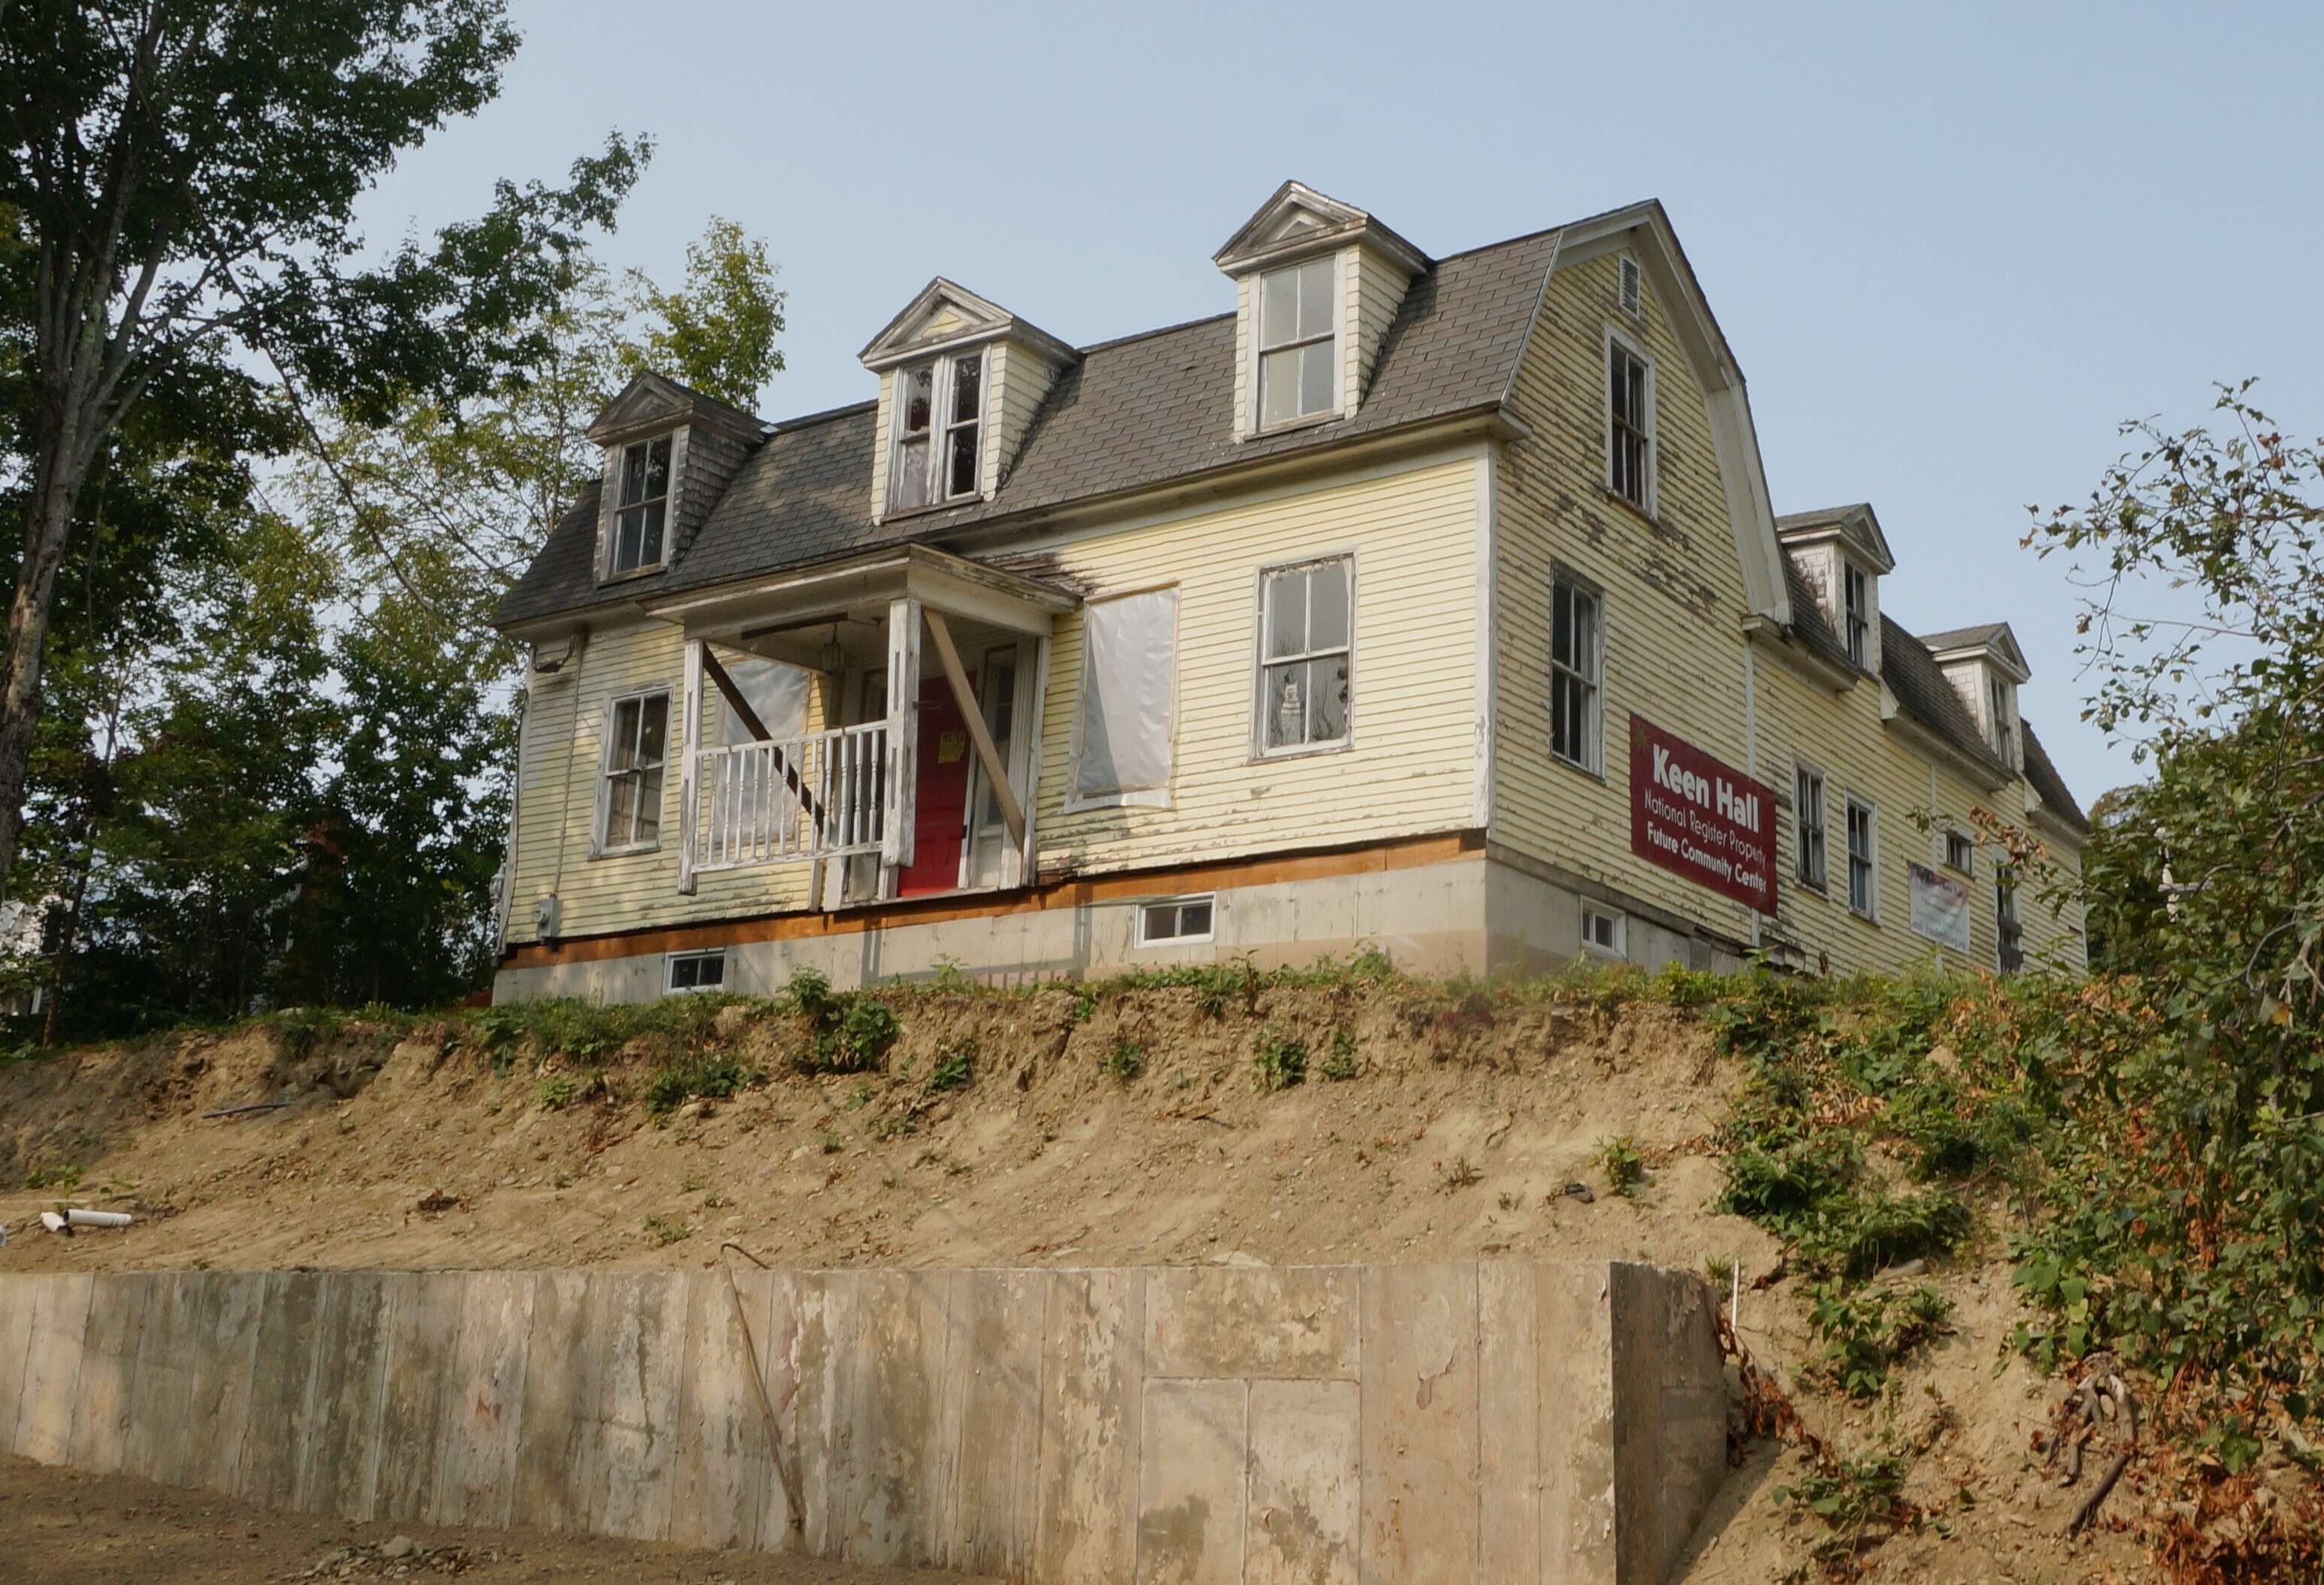 A two-century-old house with yellow peeling paint and dormers in a mansard roof sits atop a hill that has a new cement retaining wall at the bottom.